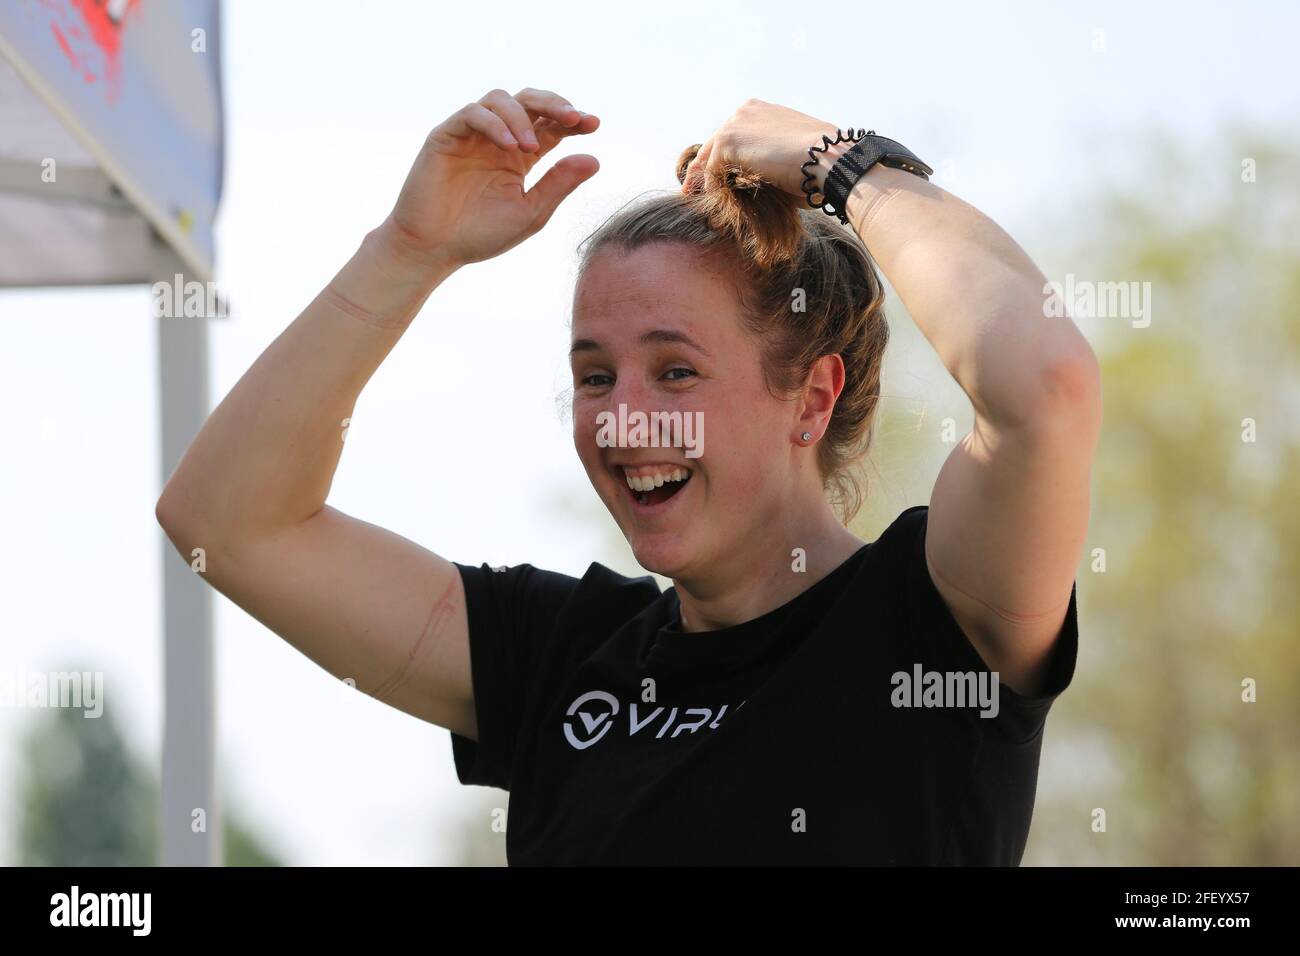 Verona, Italy. 24th Apr, 2021. 2018 world champion Laura Smulders of Netherlands during the practice session on April 24th ahead of the 1st round of the UEC BMX European Cup, in Verona (Italy) Credit: Mickael Chavet/Alamy Live News Stock Photo